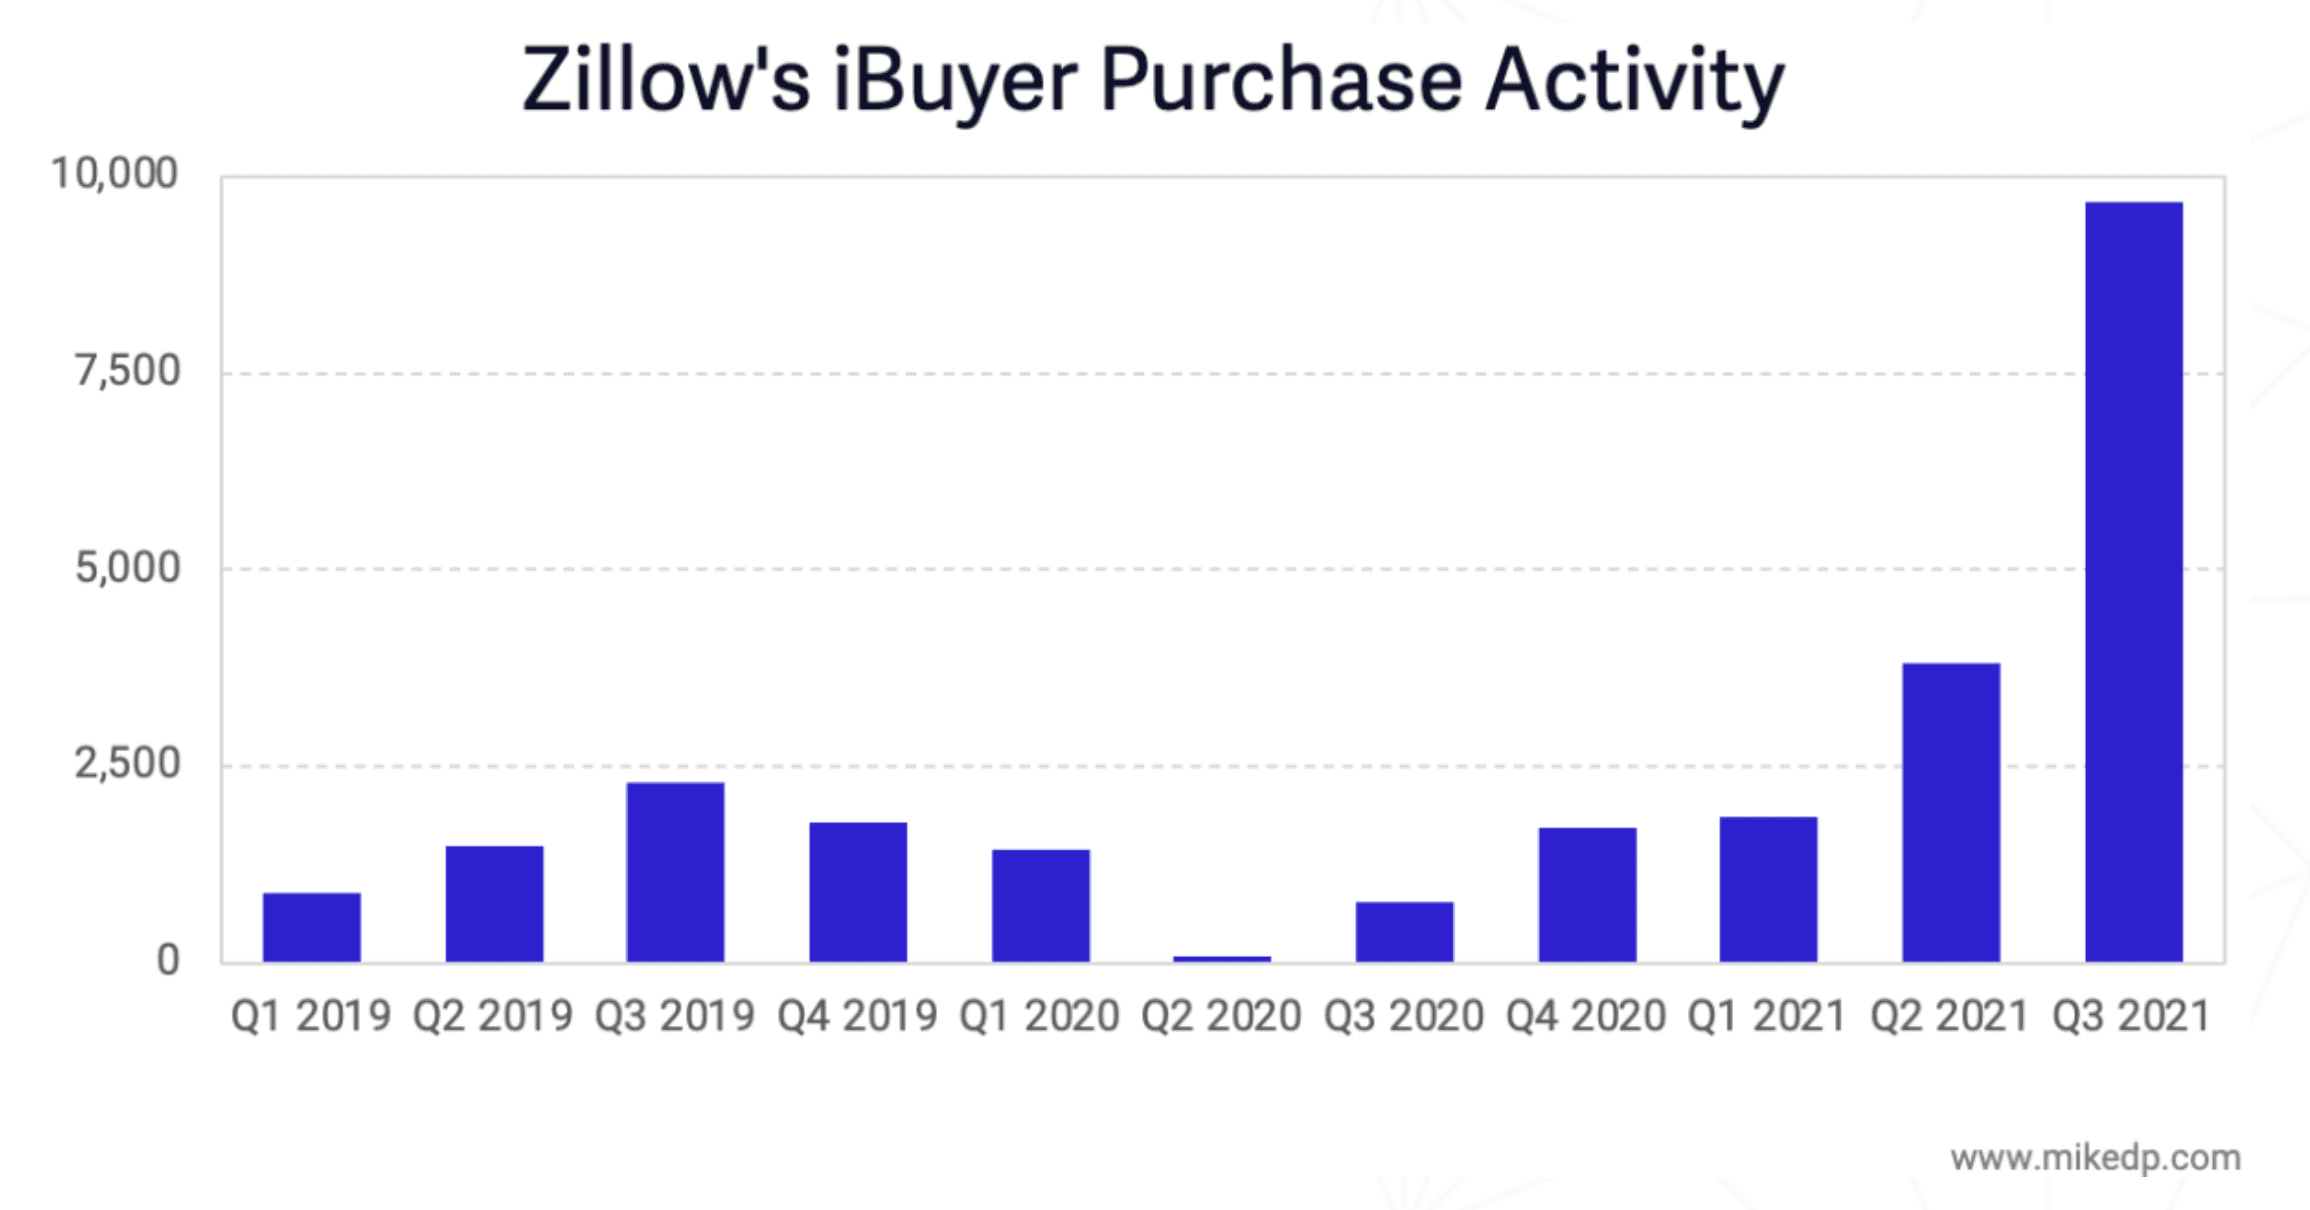 Zillow iBuyer Purchase Activity